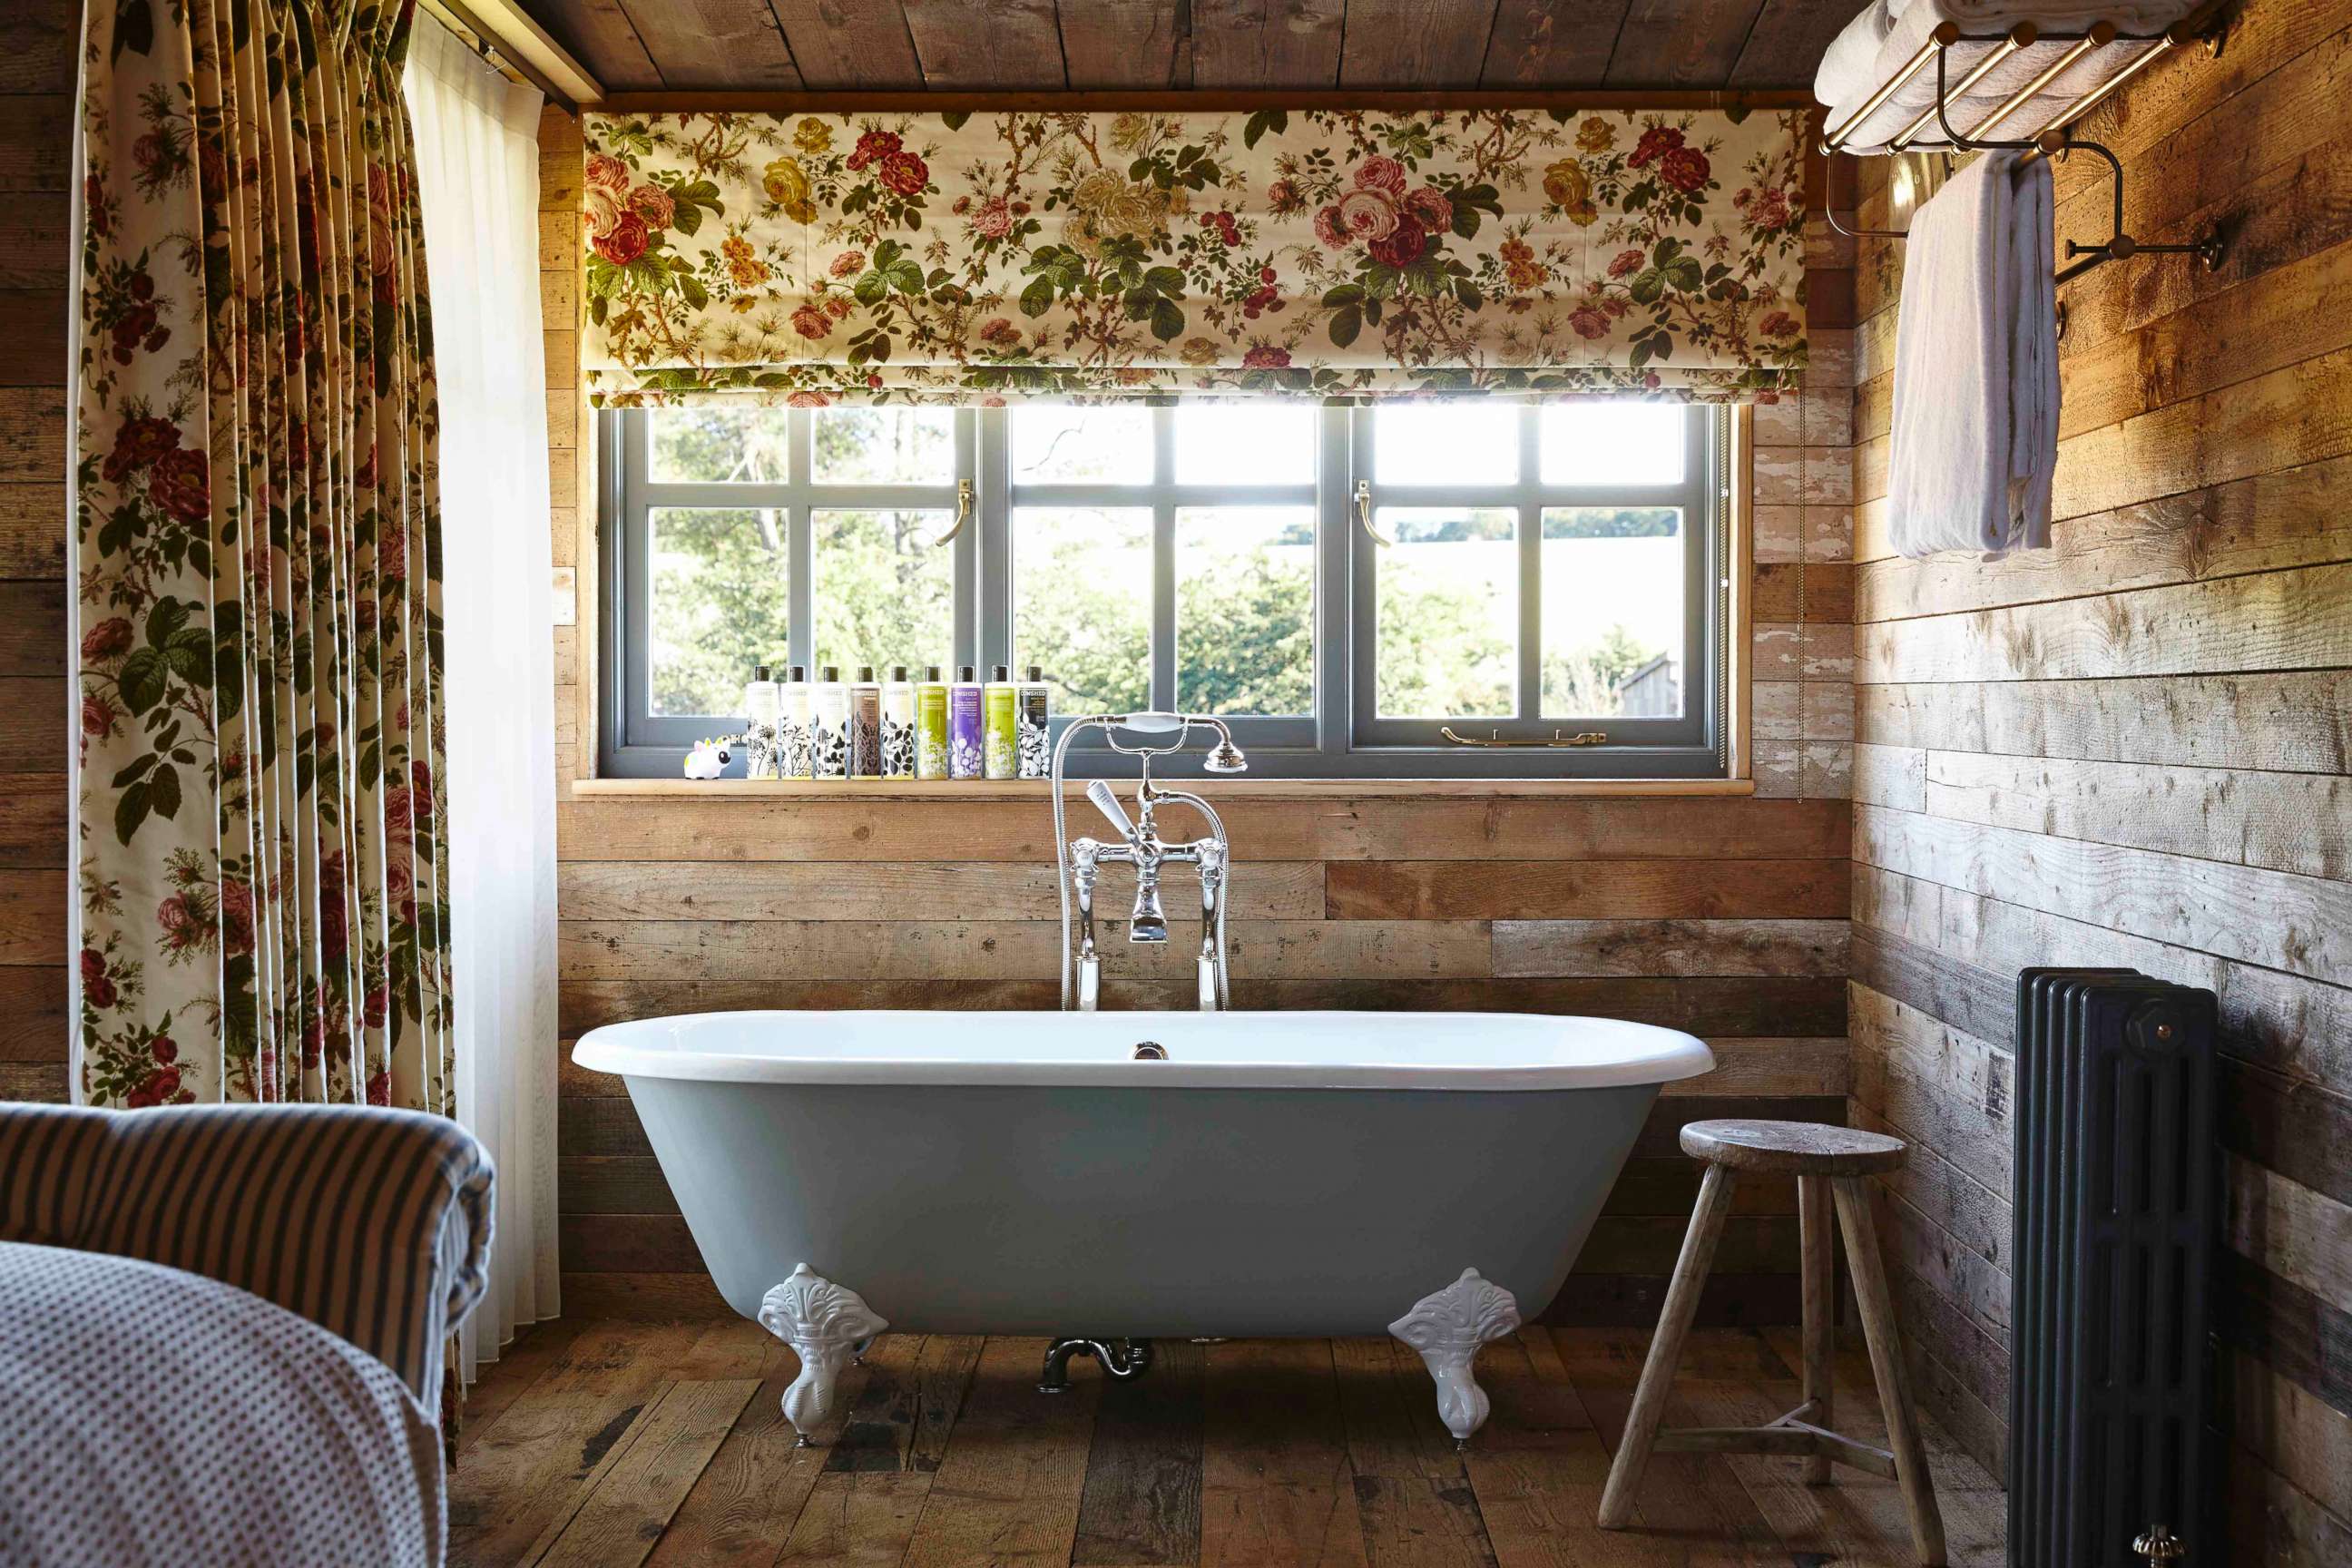 PHOTO: The bath inside a cabin at Soho Farmhouse Oxfordshire is pictured here.